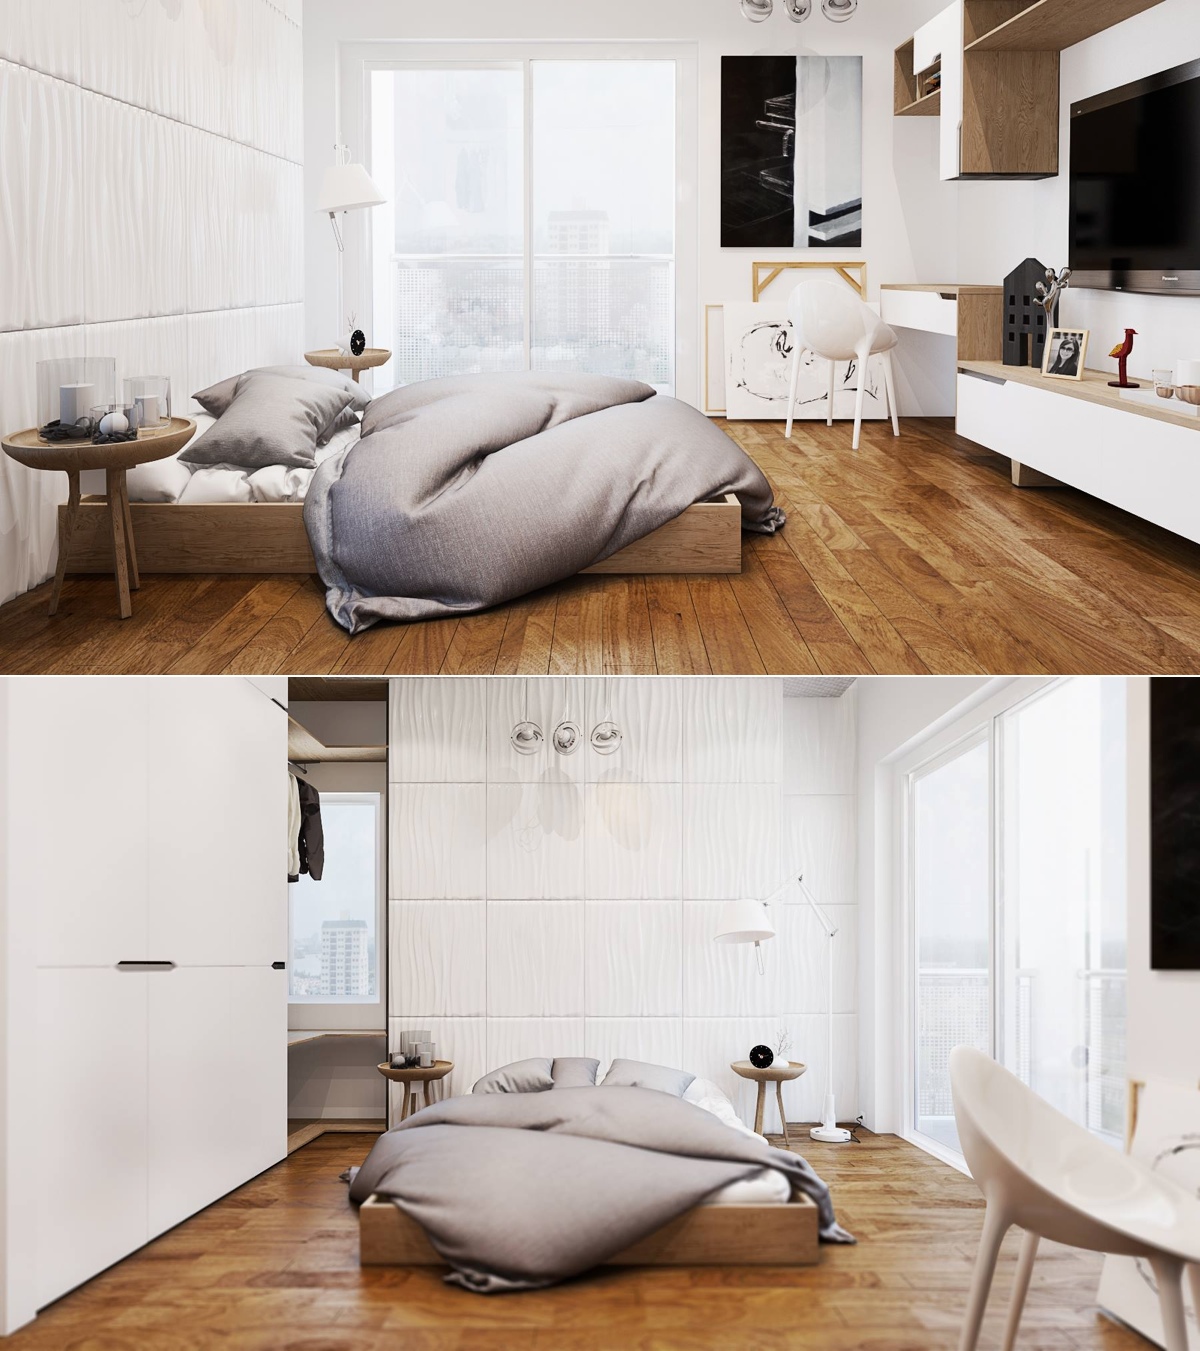 white modern bedroom decor "width =" 1200 "height =" 1351 "srcset =" https://mileray.com/wp-content/uploads/2020/05/1588509234_156_Applying-Modern-Bedroom-Designs-Below-Decorated-With-a-Variety-of.jpeg 1200w, https://mileray.com / wp-content / uploads / 2016/09 / Koj-Designs-266x300.jpeg 266w, https://mileray.com/wp-content/uploads/2016/09/Koj-Designs-768x865.jpeg 768w, https: / / mileray.com/wp-content/uploads/2016/09/Koj-Designs-910x1024.jpeg 910w, https://mileray.com/wp-content/uploads/2016/09/Koj-Designs-696x784.jpeg 696w, https://mileray.com/wp-content/uploads/2016/09/Koj-Designs-1068x1202.jpeg 1068w, https://mileray.com/wp-content/uploads/2016/09/Koj-Designs- 373x420 .jpeg 373w "sizes =" (maximum width: 1200px) 100vw, 1200px